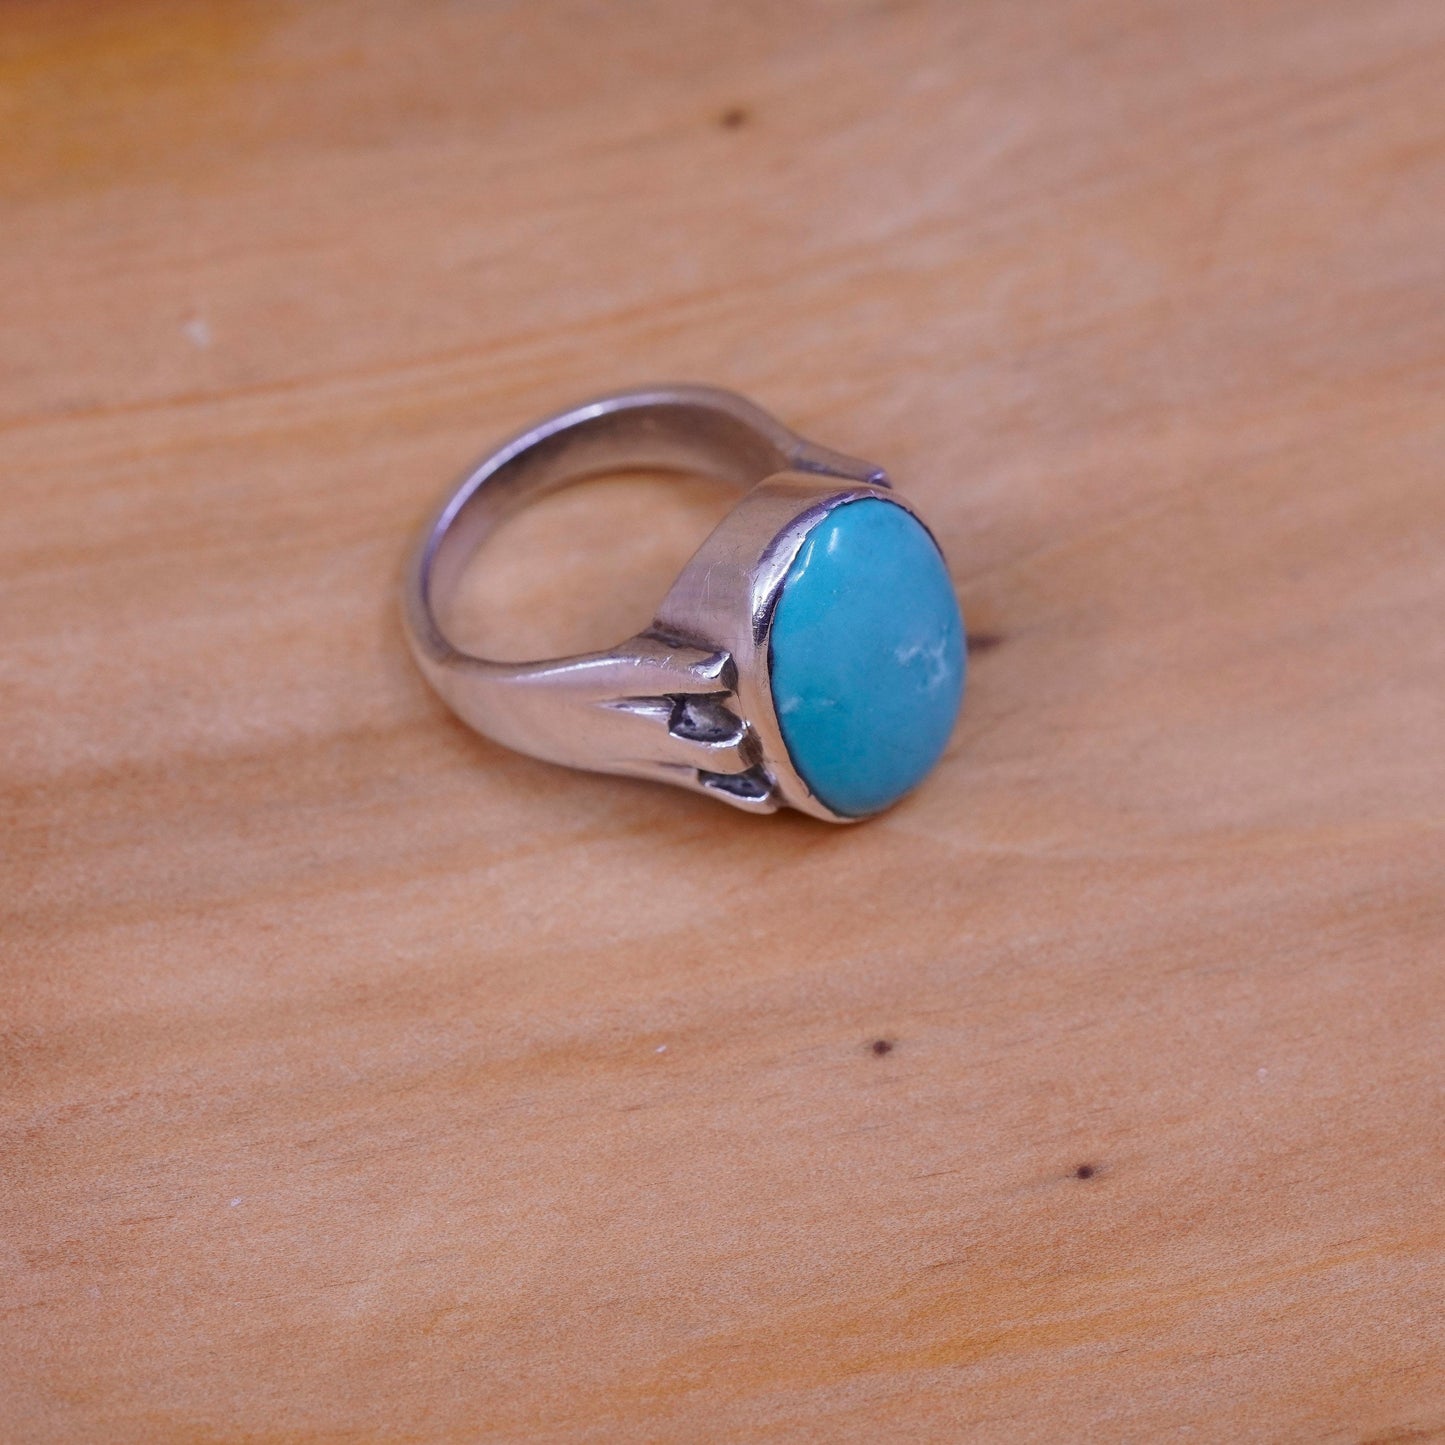 Size 6, vintage Sterling 925 silver handmade ring with oval turquoise